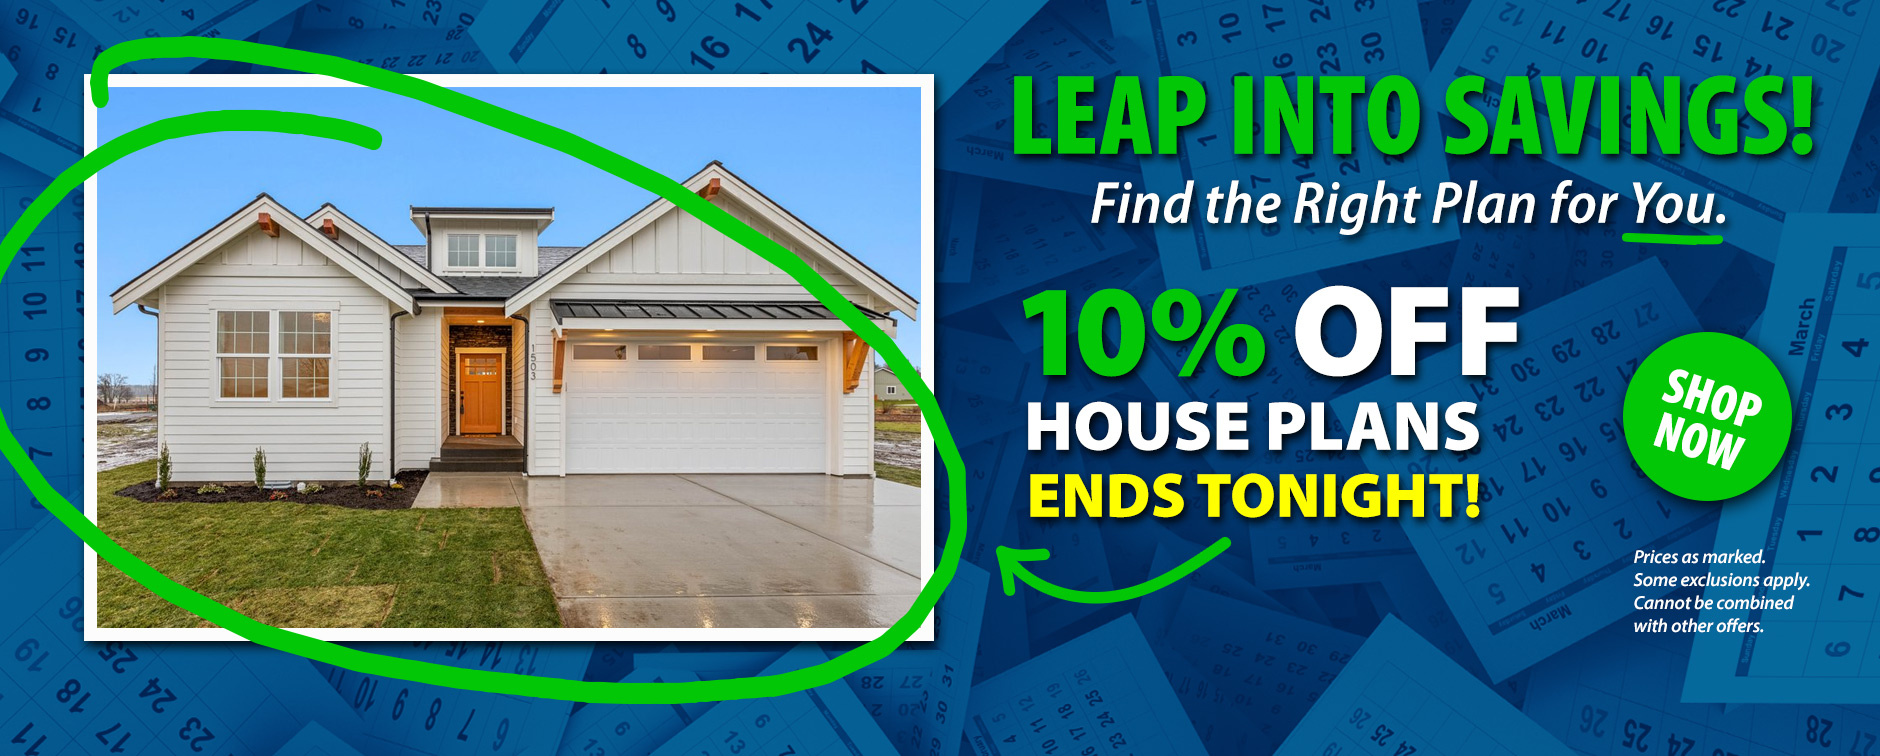 Leap Year Event: Take 10% Off House Plans. Sale Ends Tonight.